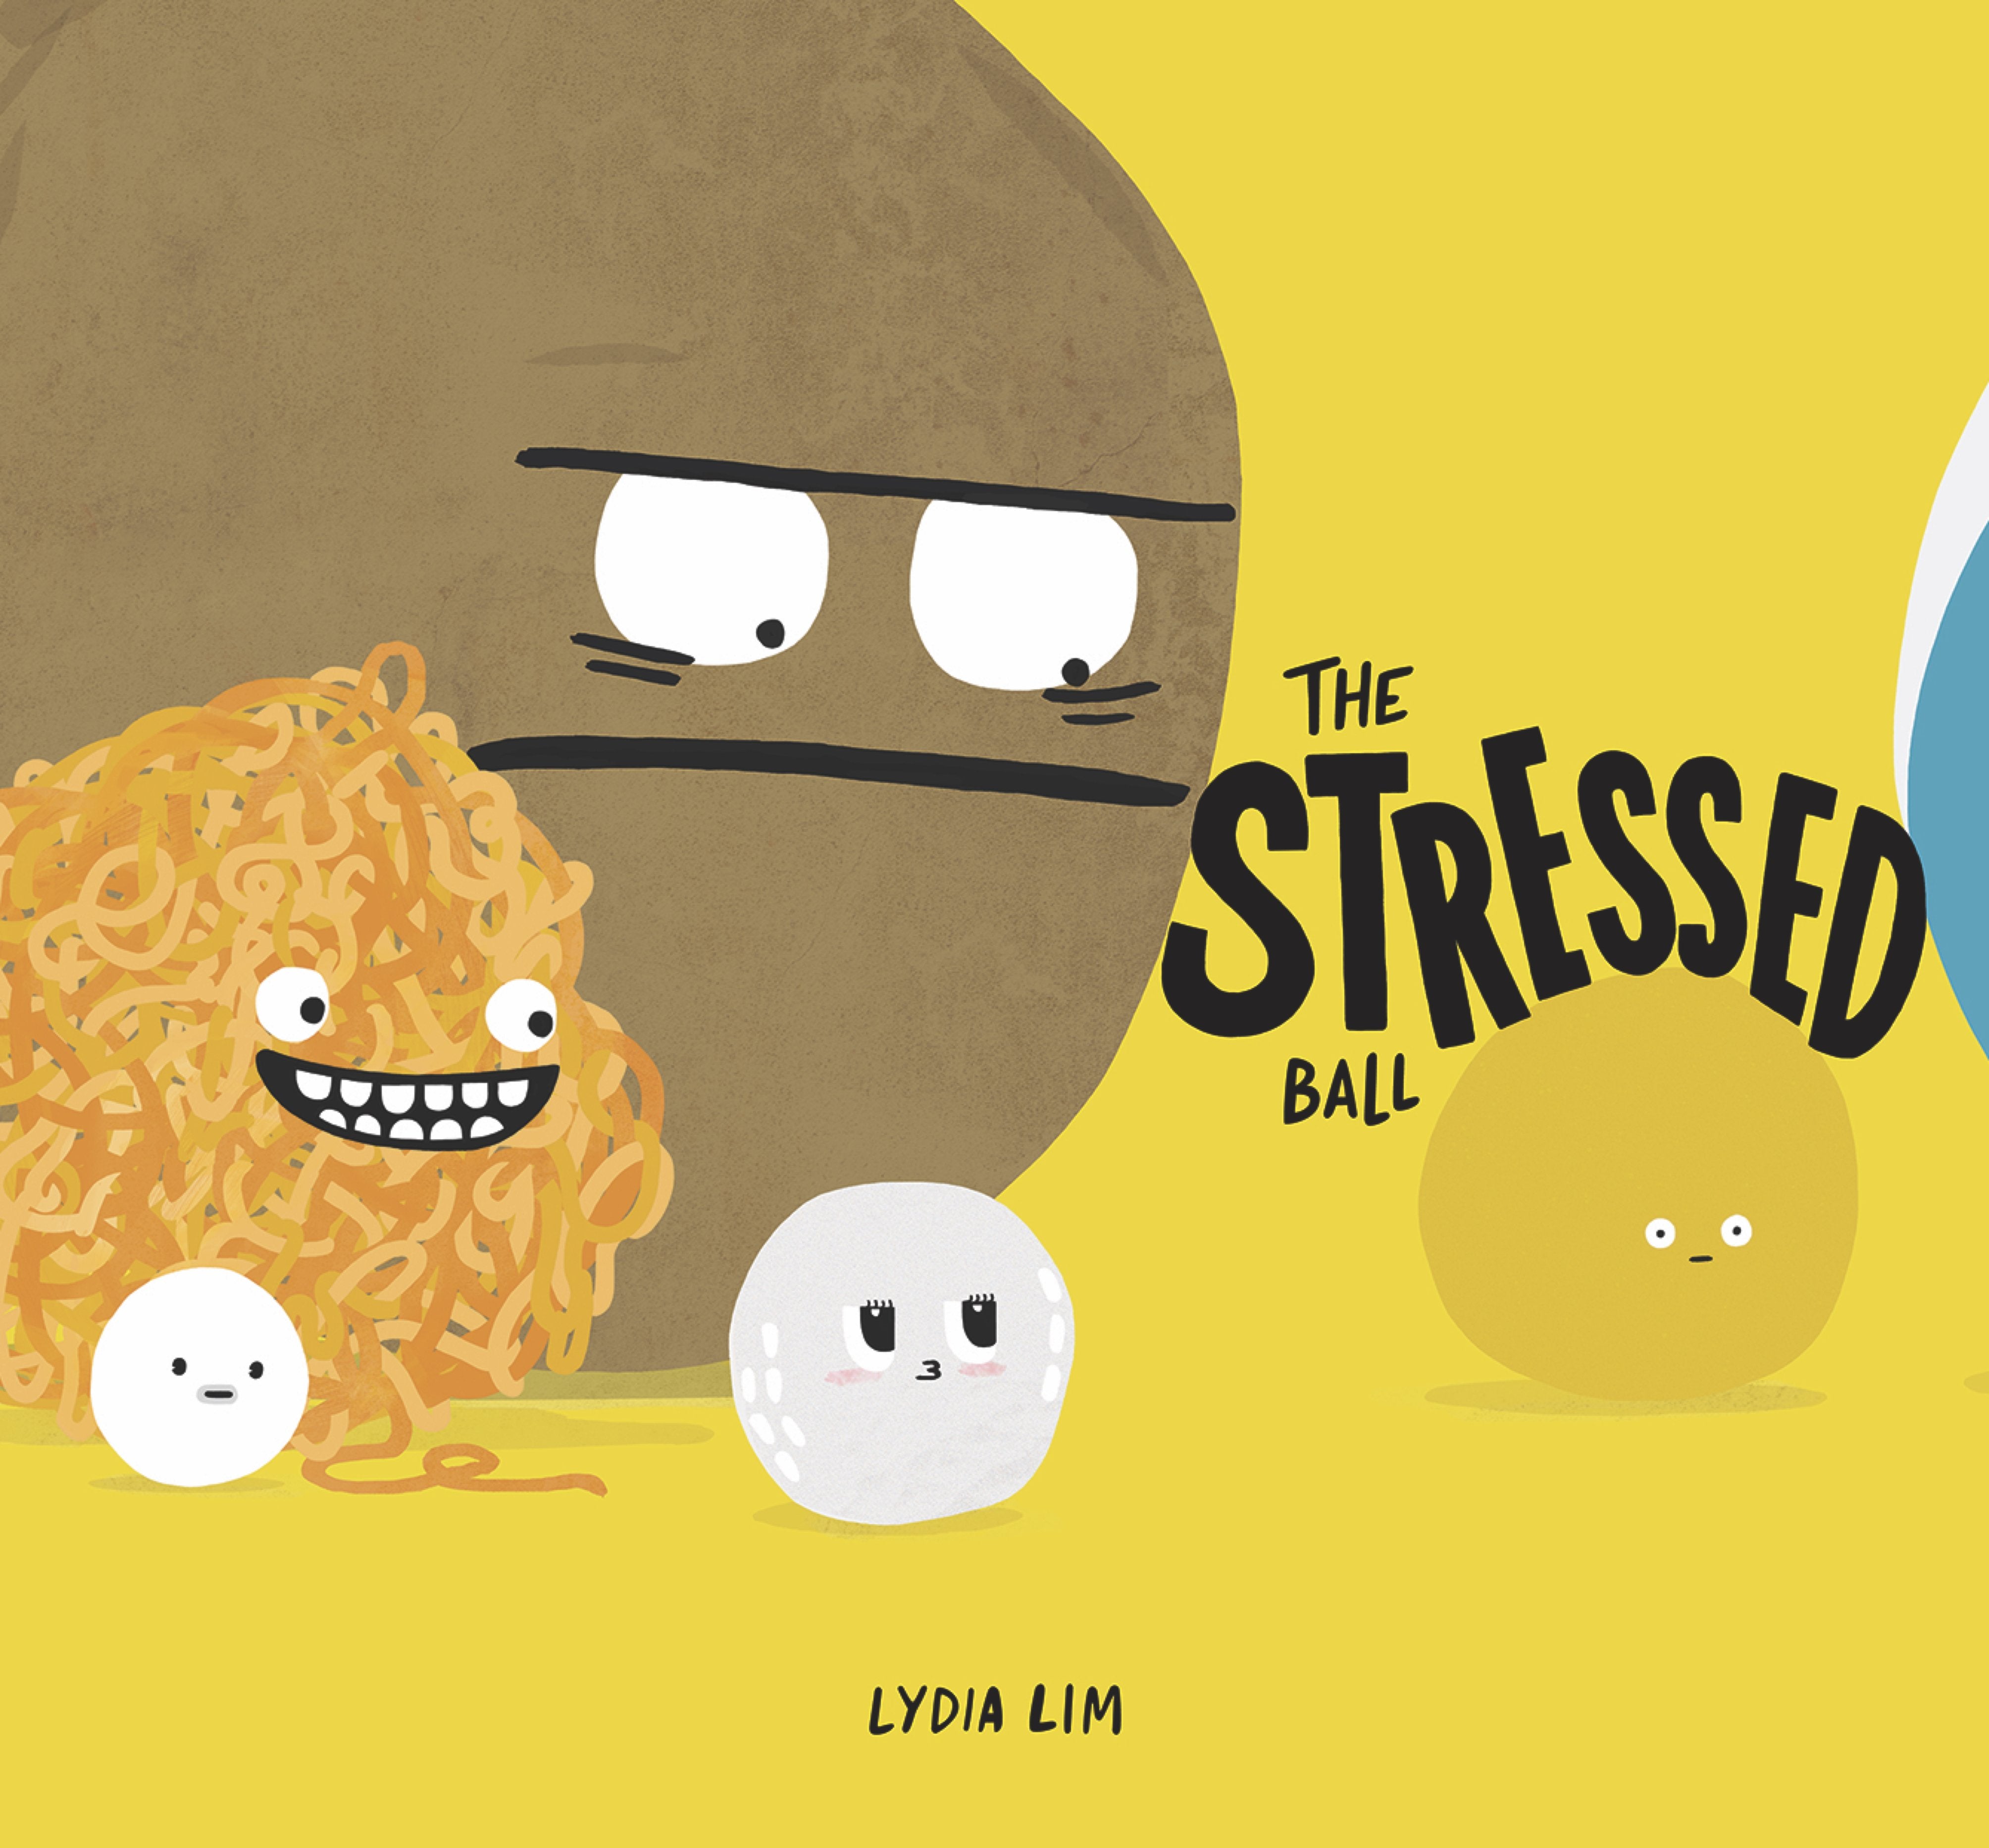 The Stressed Ball